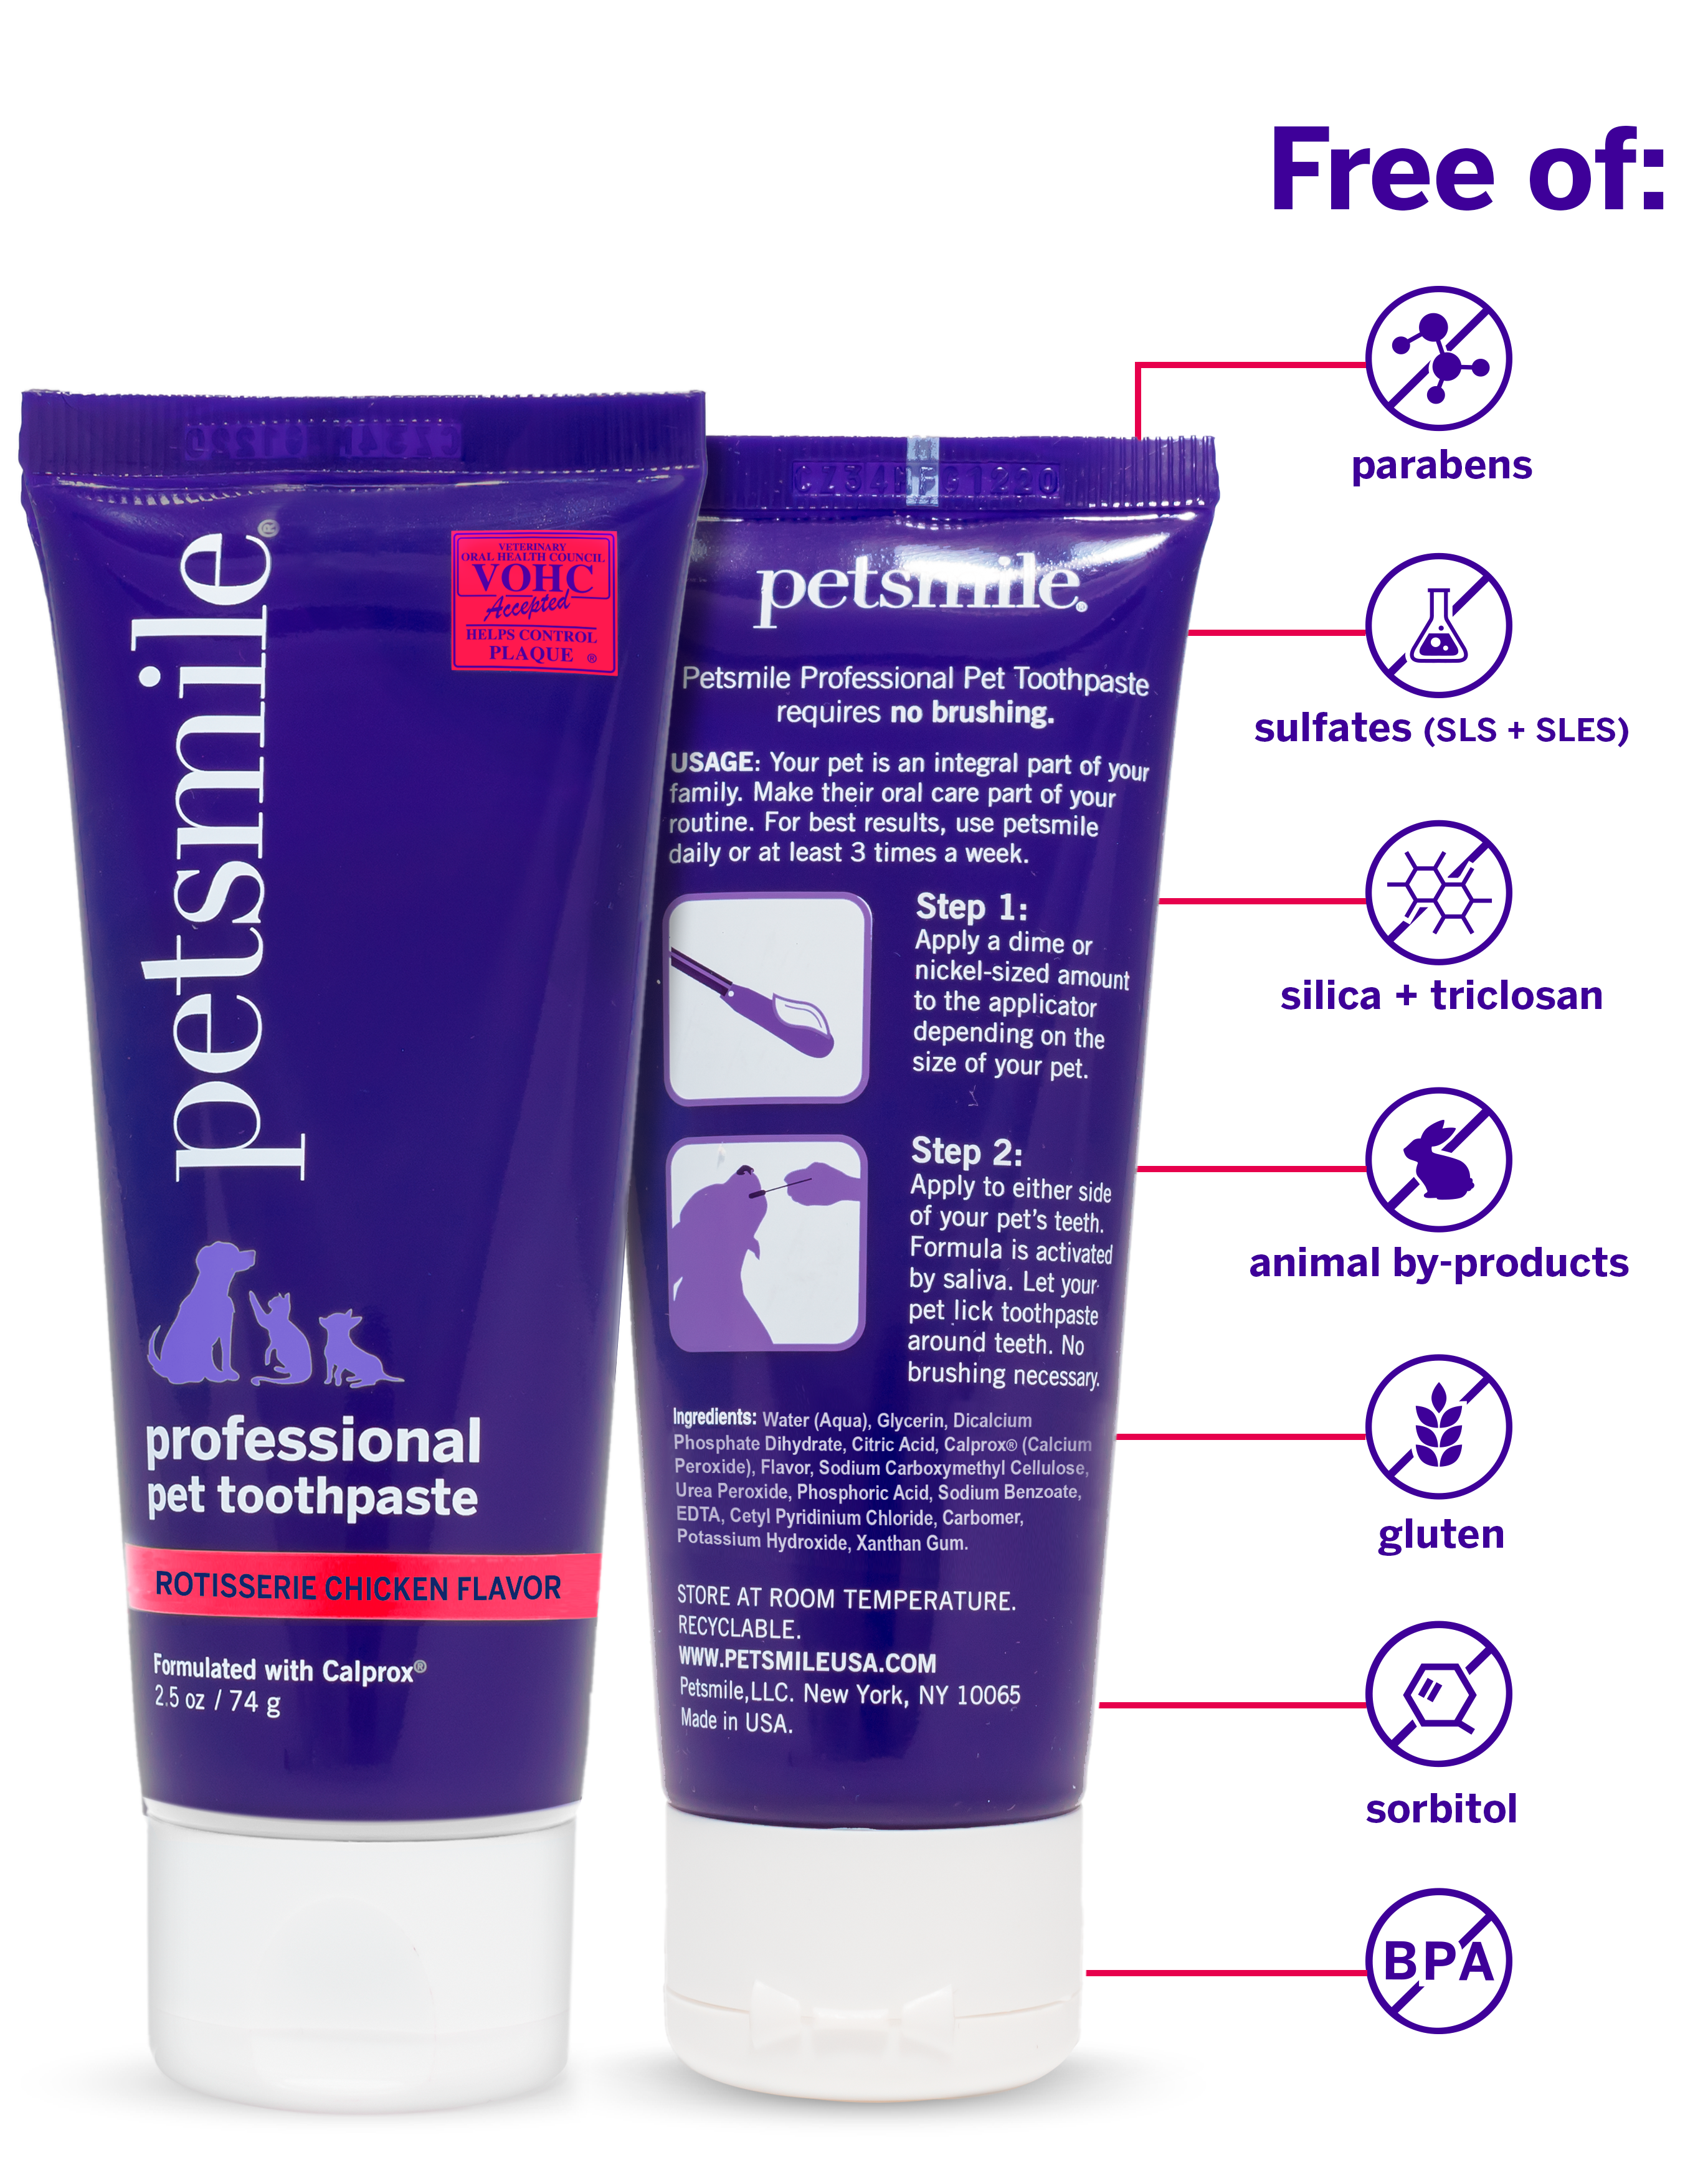 Improved dental health, fresher breath , Small tube of Roisserie Chicken flavor , Small purple tube of petsmile toothpaste , BPA-free, vegan, VOHC certified , 2.5 OZ of Roisserie Chicken flavor toothpaste